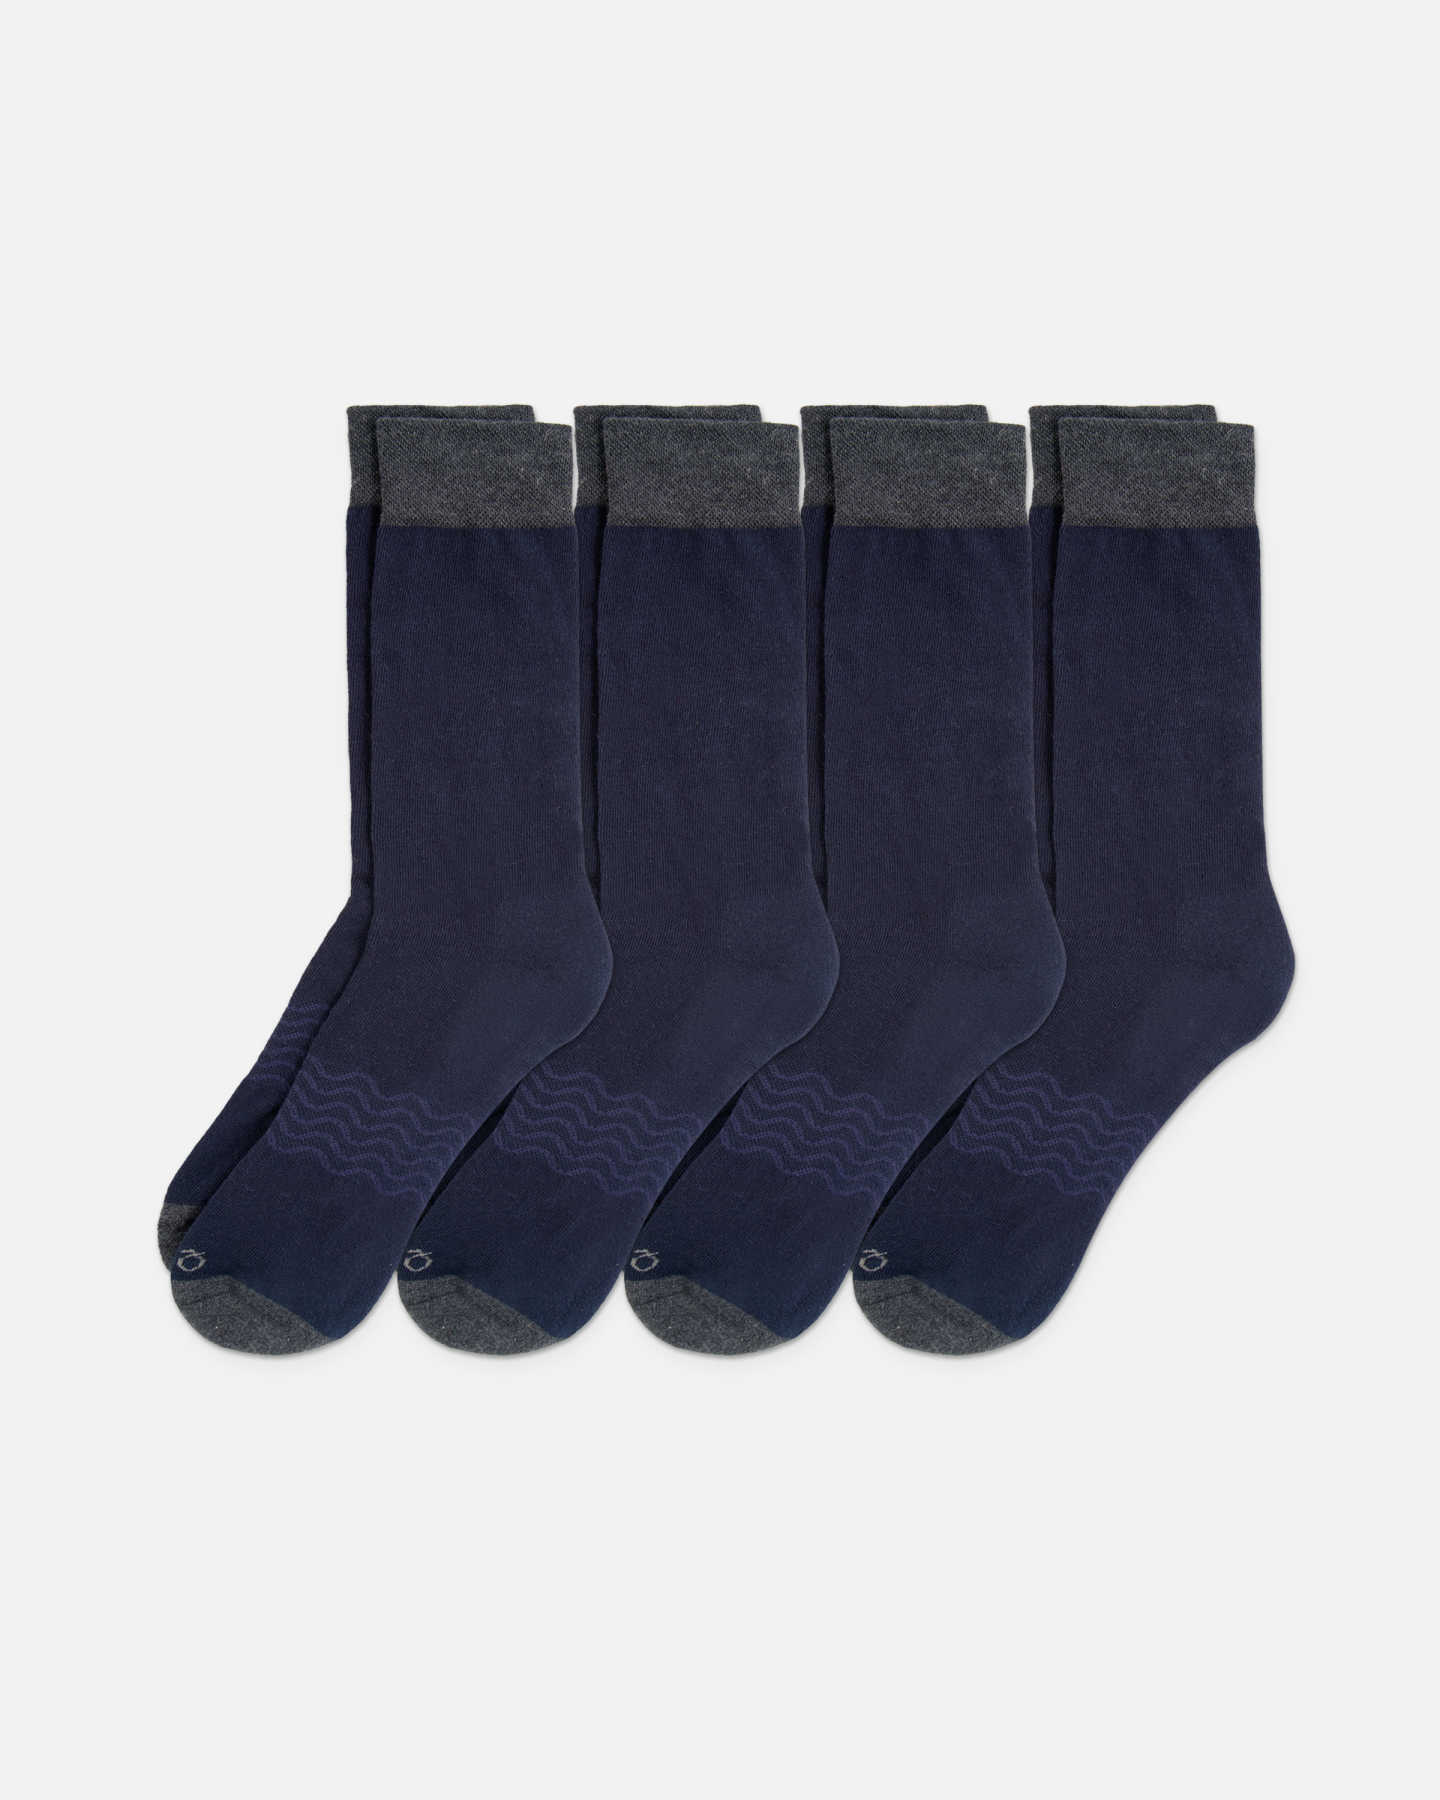 You May Also Like - Organic Cotton Dress Socks (4-Pack) - Navy